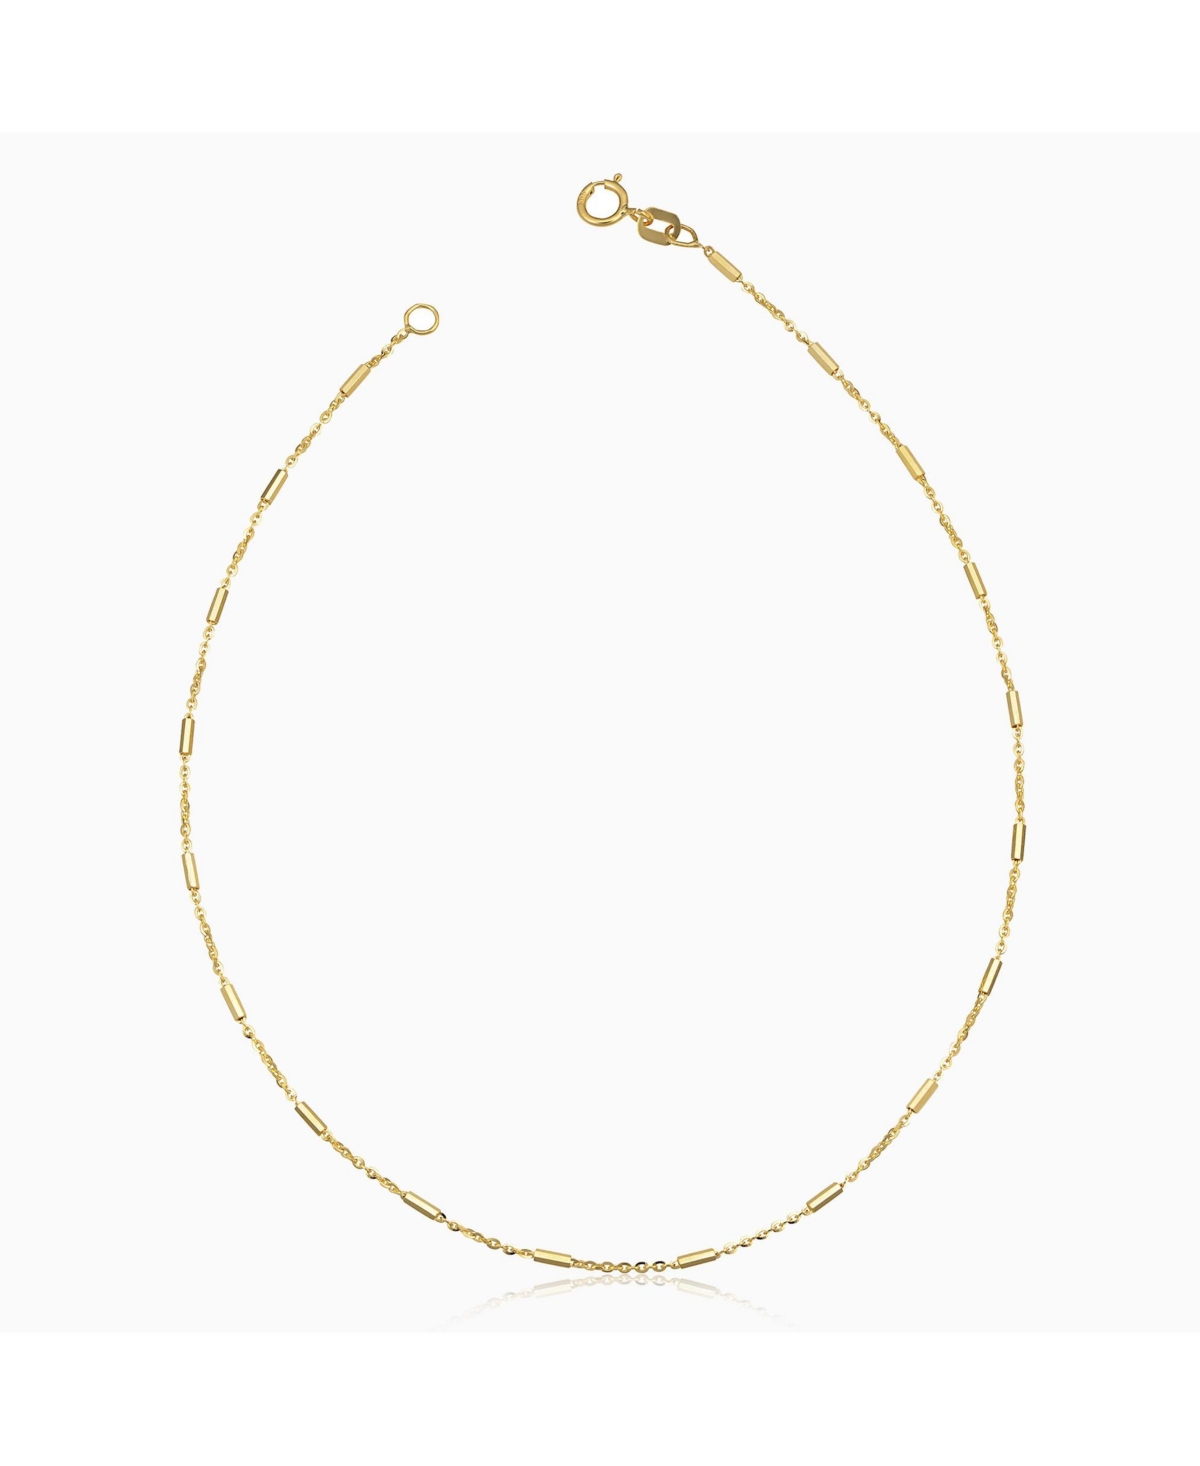 ORADINA VICENZA ROLO ANKLET IN 14K YELLOW GOLD